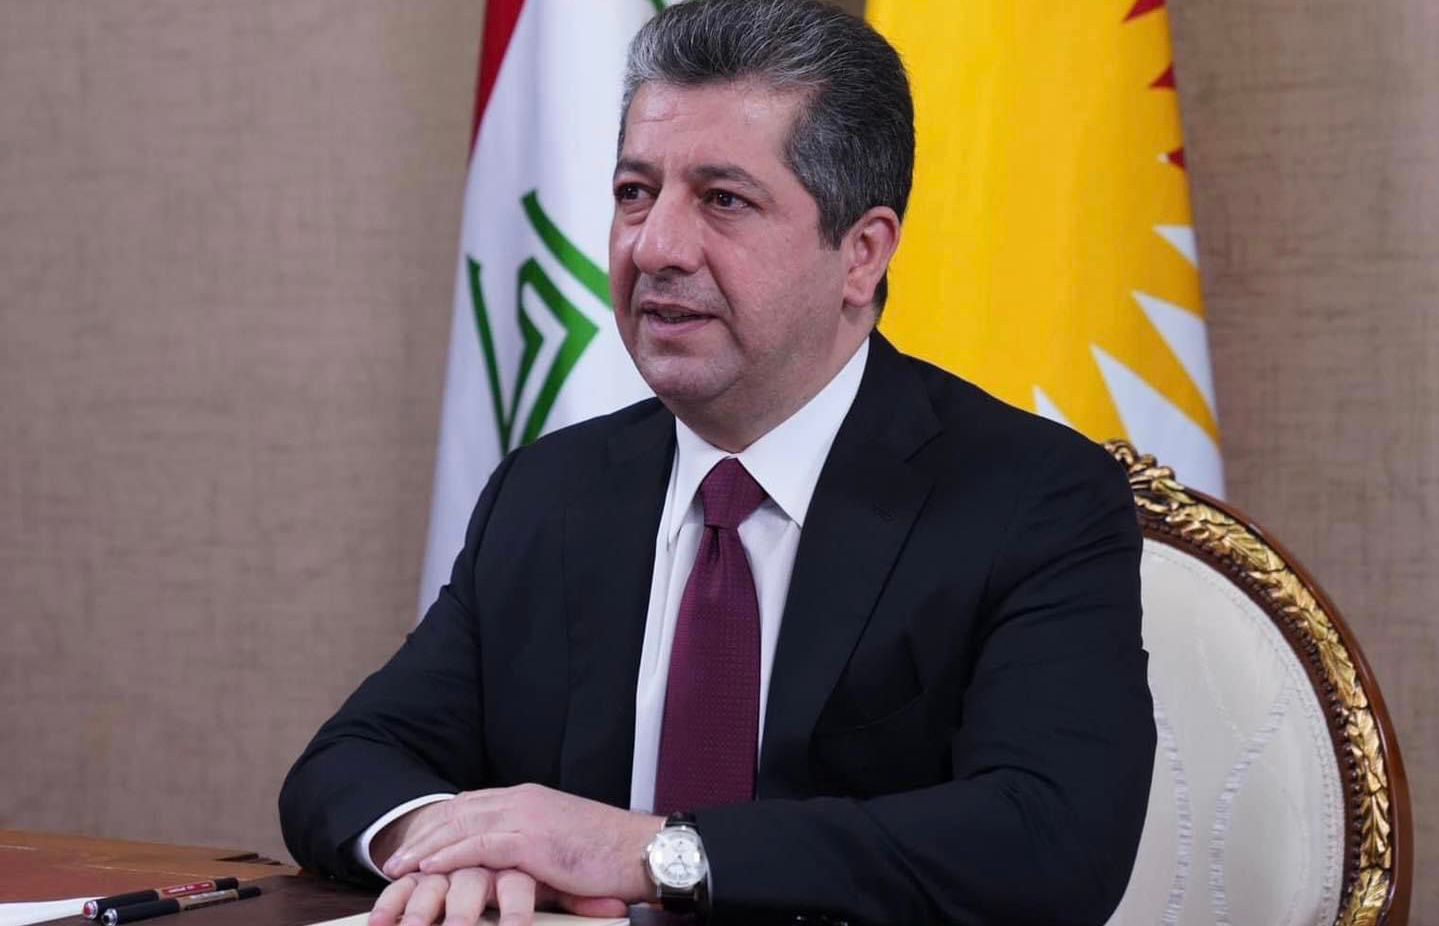 PM Barzani on the 1991 Uprising: a turning point in the Kurds' struggle for independence